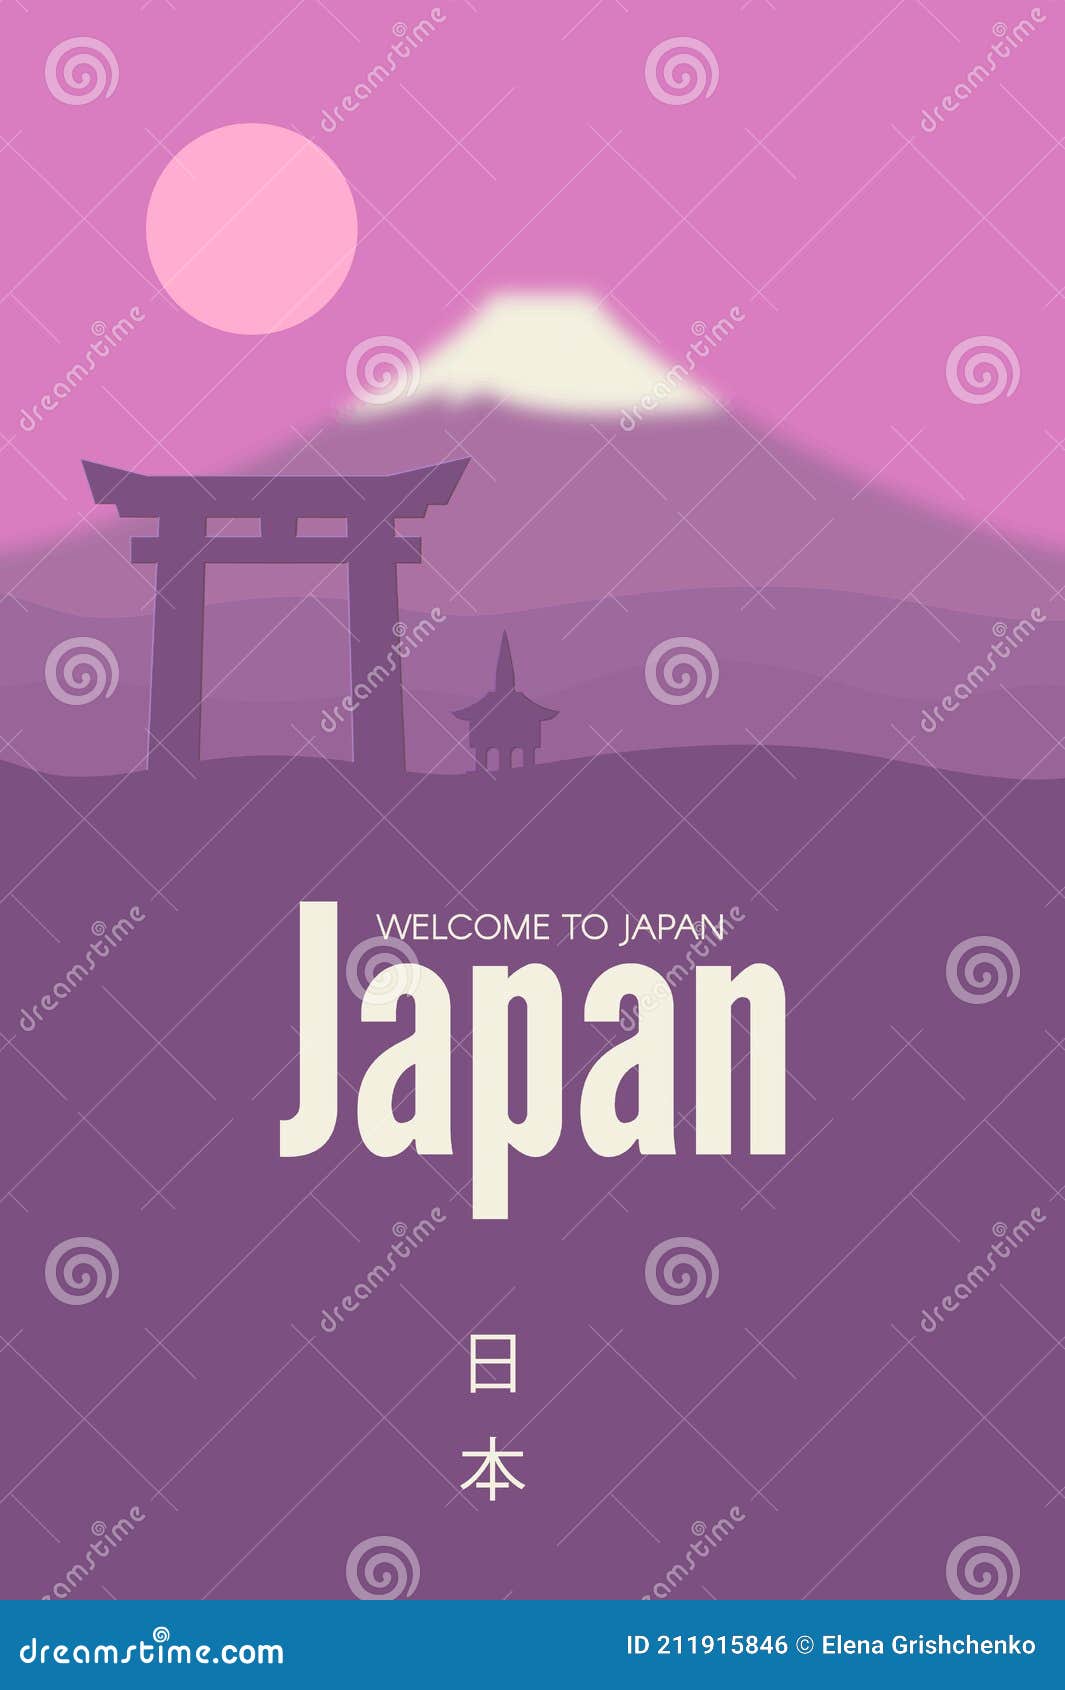 wellcome to japan. japanese landscape with fuji mountain, japanese gate toria and sun. asian background. japanese text